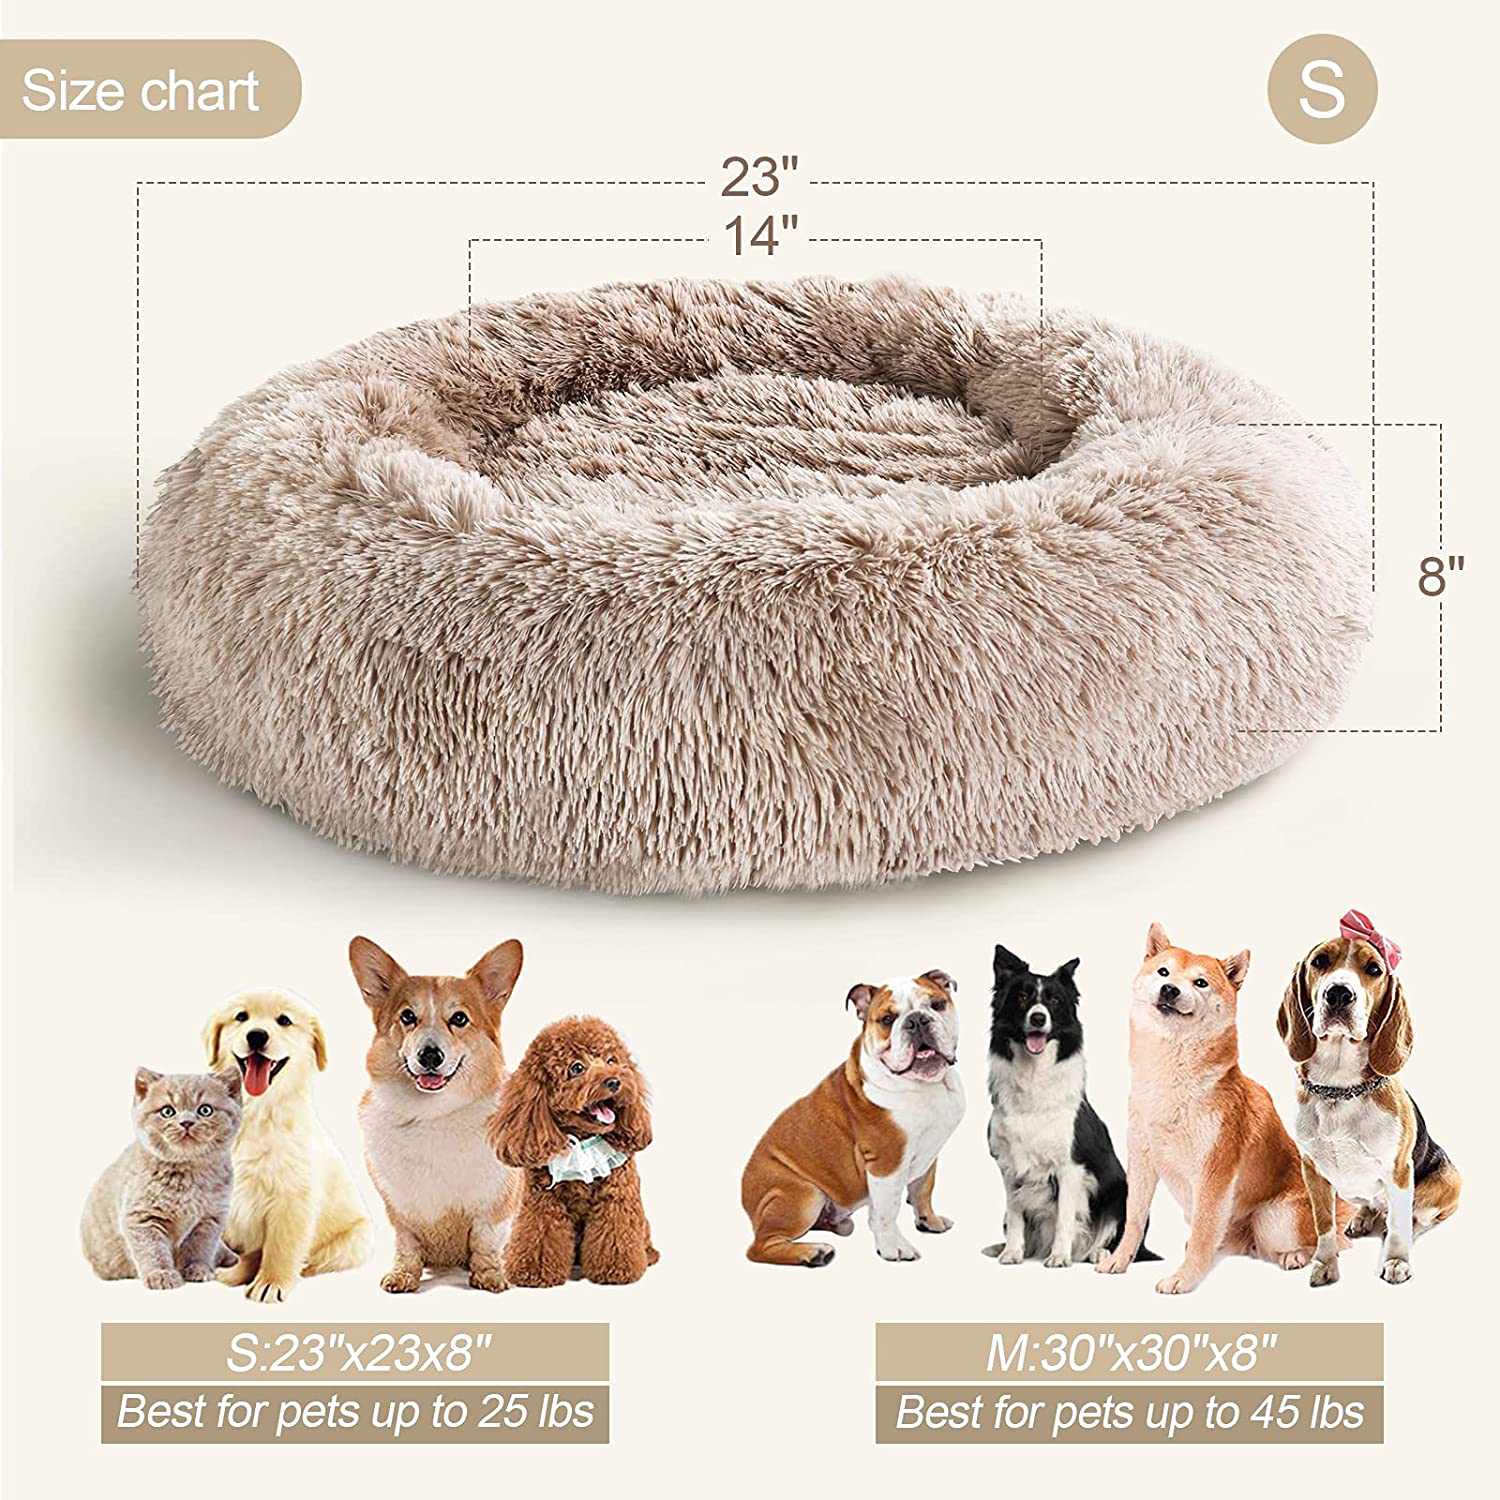 COOSLEEP HOME Calming Dog Bed for Dog & Cat with Faux Fur Donut Cuddler and Non-Slip, Waterproof Base, Machine Washable, Durable (23"/30")